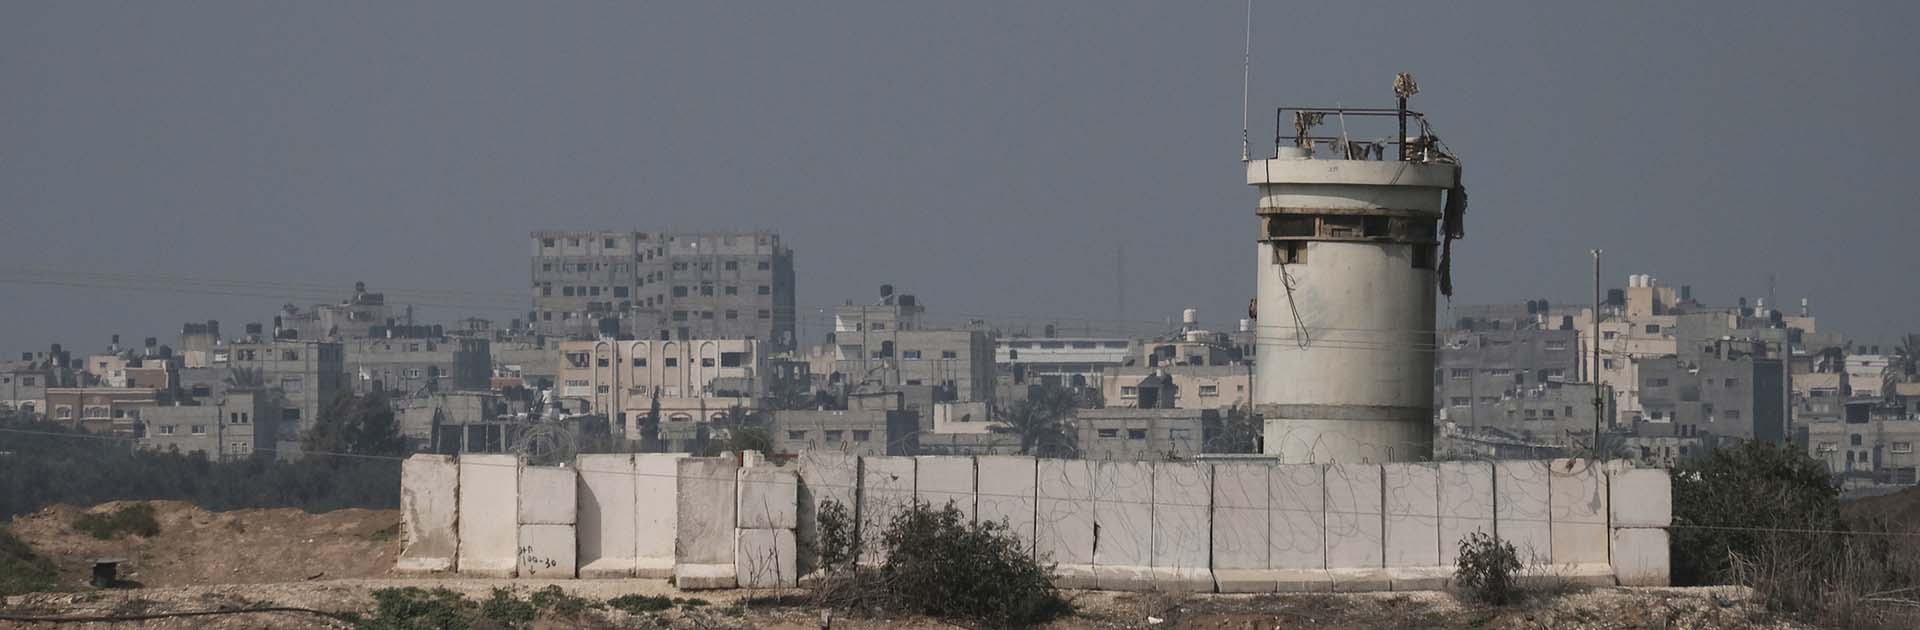 Gaza border with Israel. Distant view of residential houses in the northern part of the Gaza strip across an Israeli army post